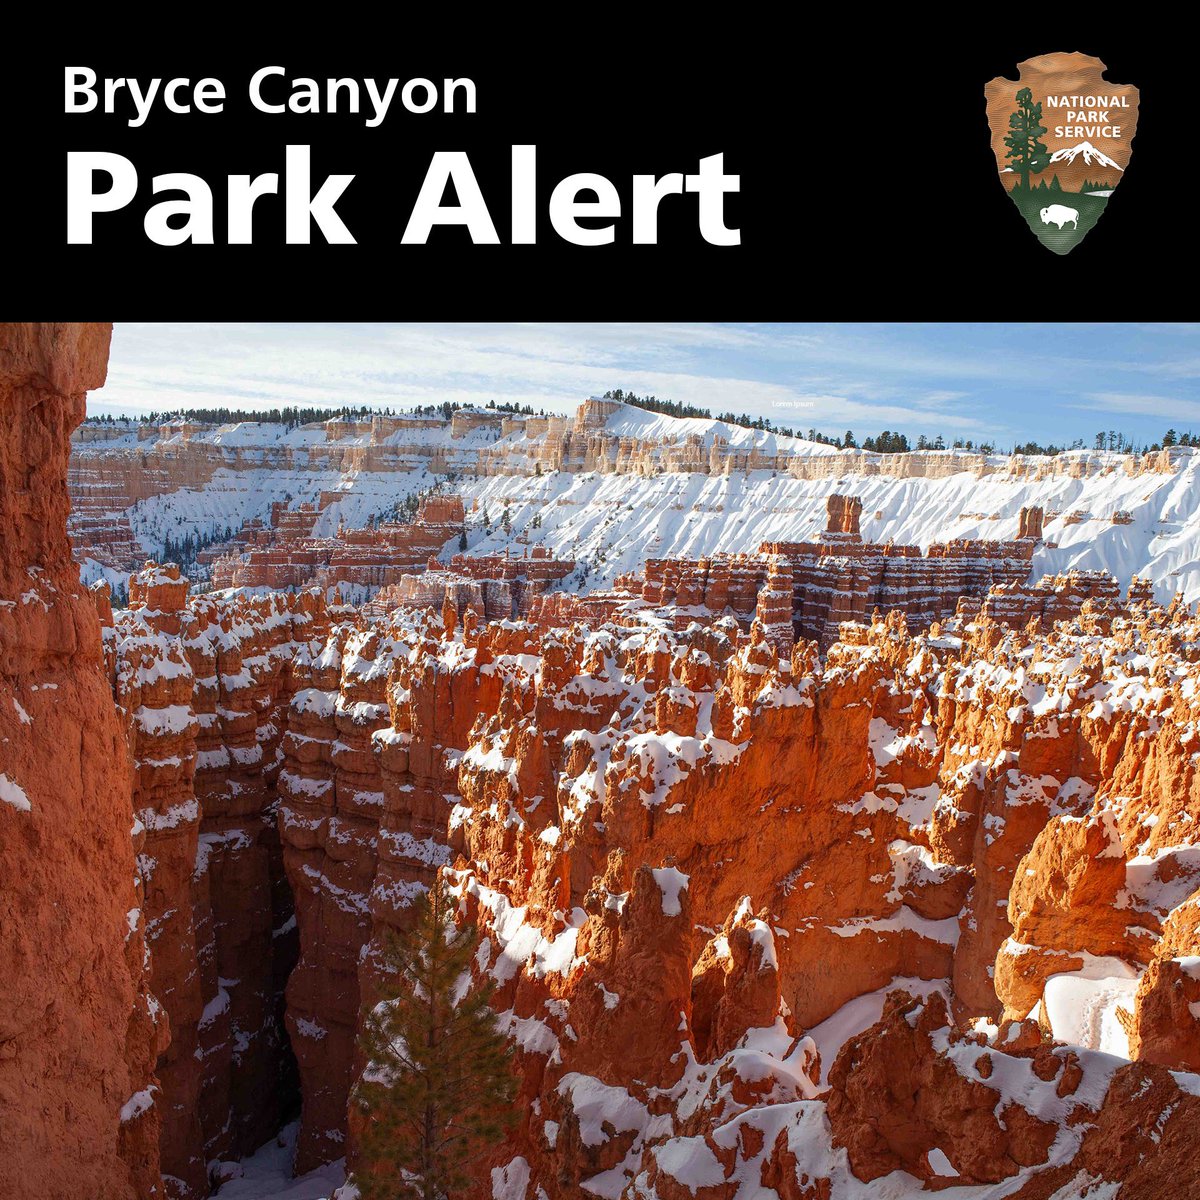 ⚠️Main Road Status: Due to approaching winter weather, the Main Road is open to Mile 3 of 18. ✅The Bryce Amphitheater area remains open to all vehicles. Trails are currently a mixture of mud, ice, and snow. Boots and traction devices recommended. go.NPS.gov/BryceConditions